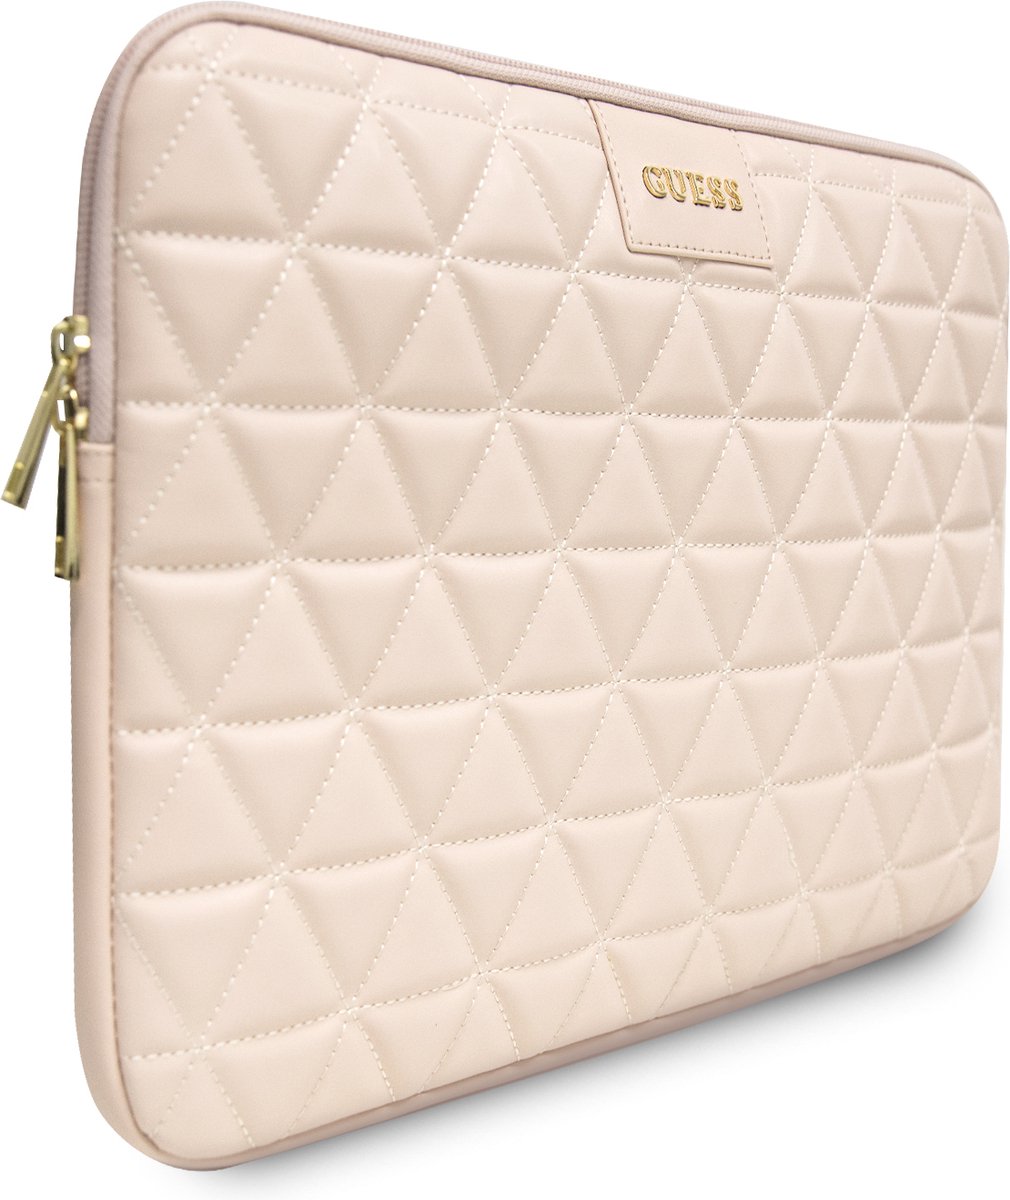 Guess Quilted Sleeve voor 13 inch laptops - Roze | bol.